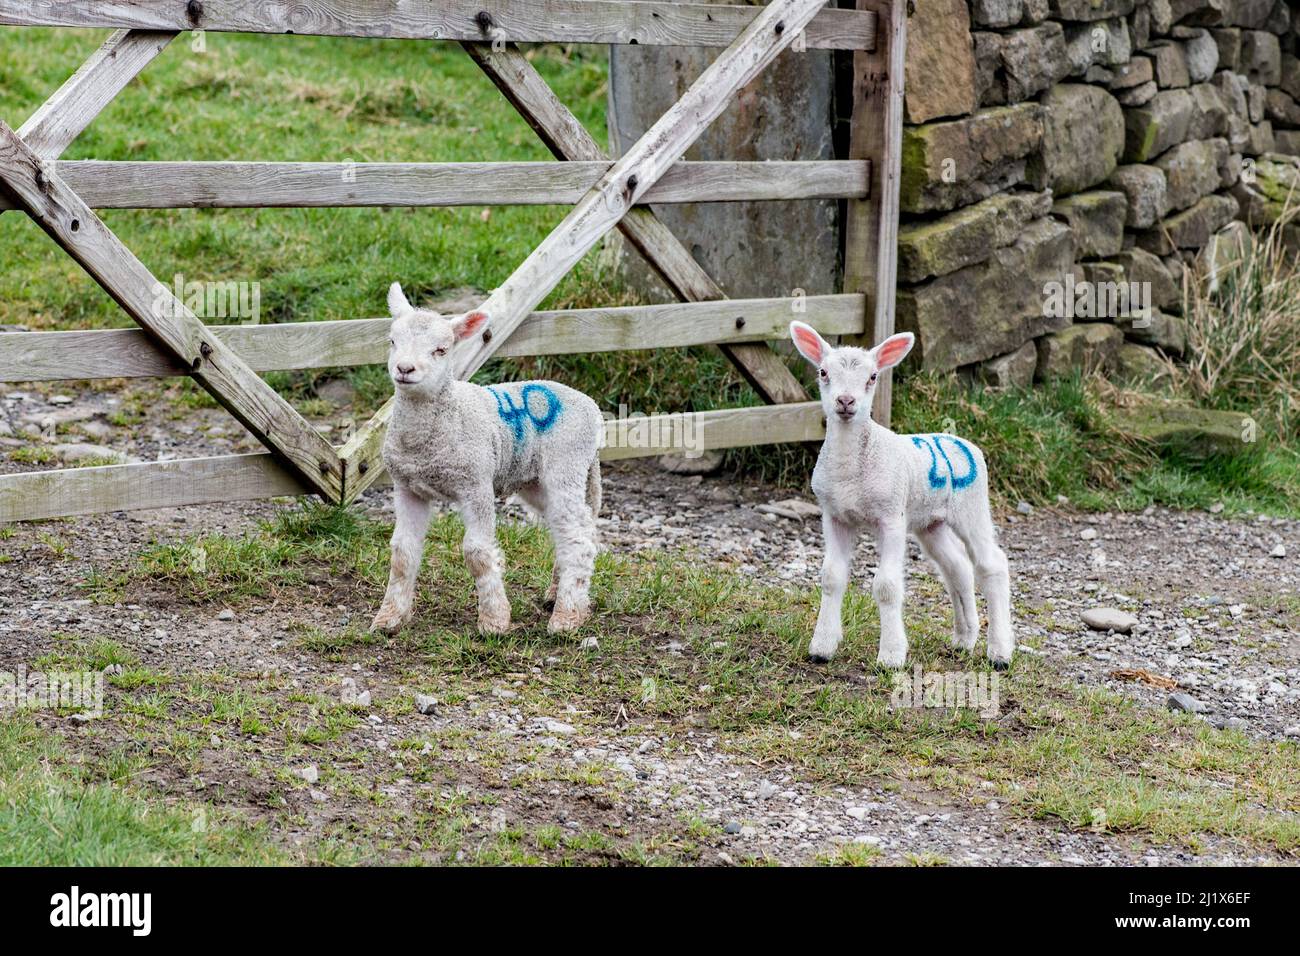 Lambs  have wriggled under a farm gate and stand confused as to how to get back to their mothers Stock Photo